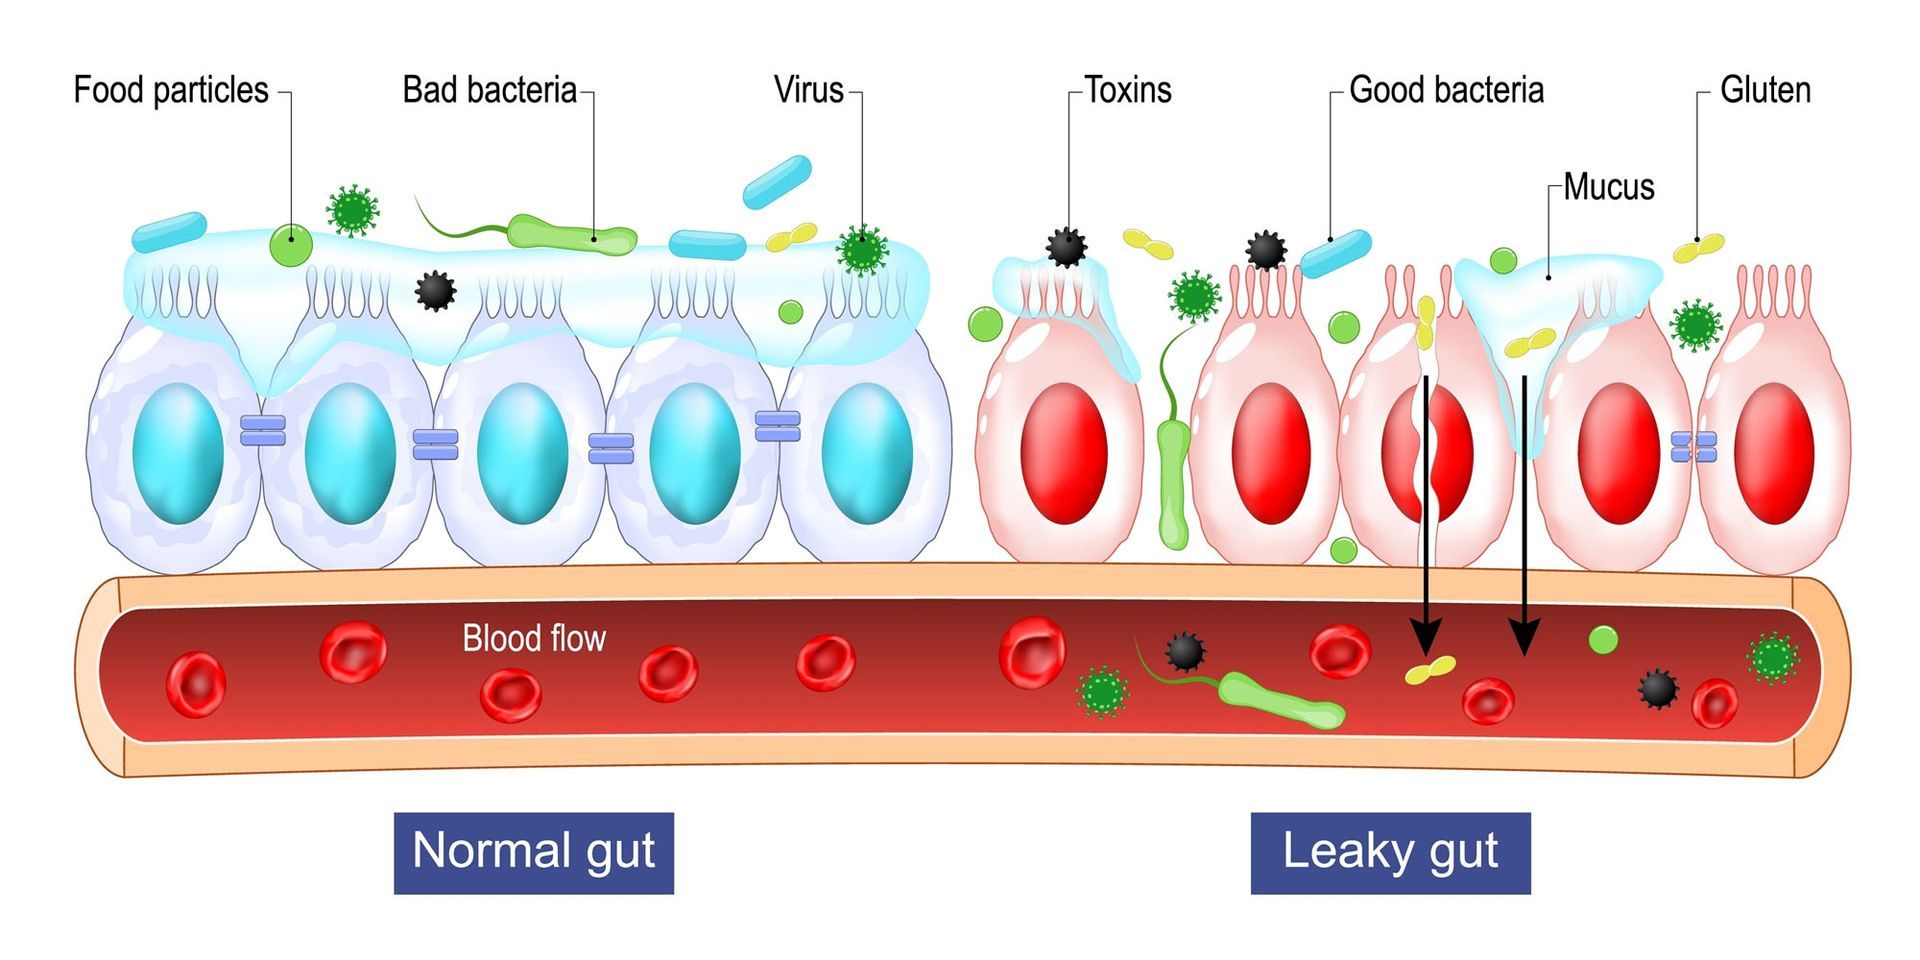 Leaky Gut Help - How To Identify, Heal, Rebuild, and Repair Your Leaky Gut